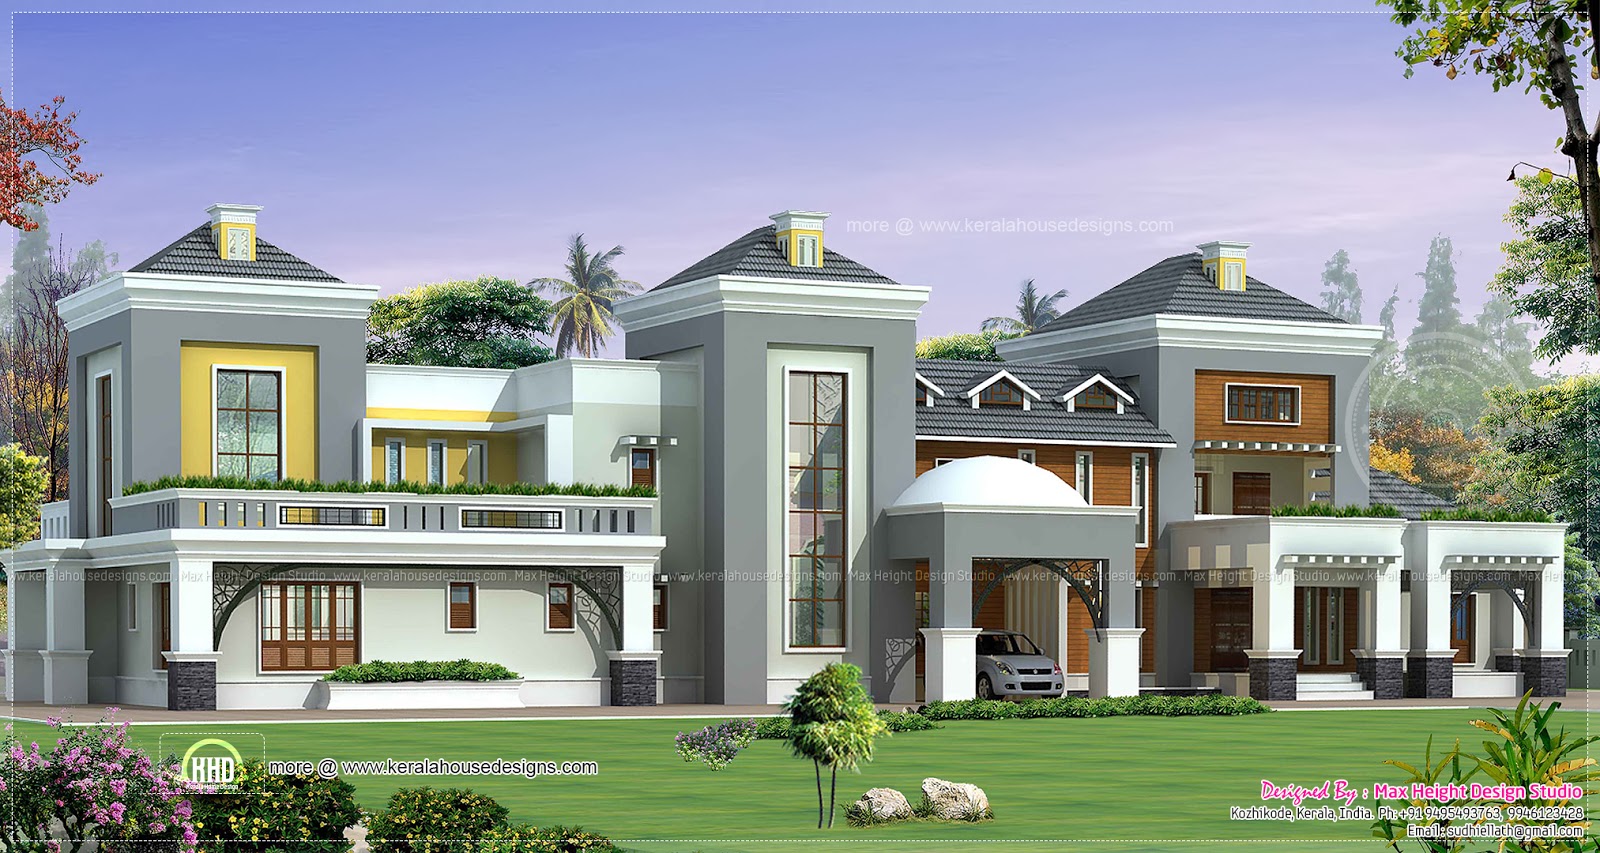  Luxury  house  plan  with photo Kerala home  design  and floor plans 